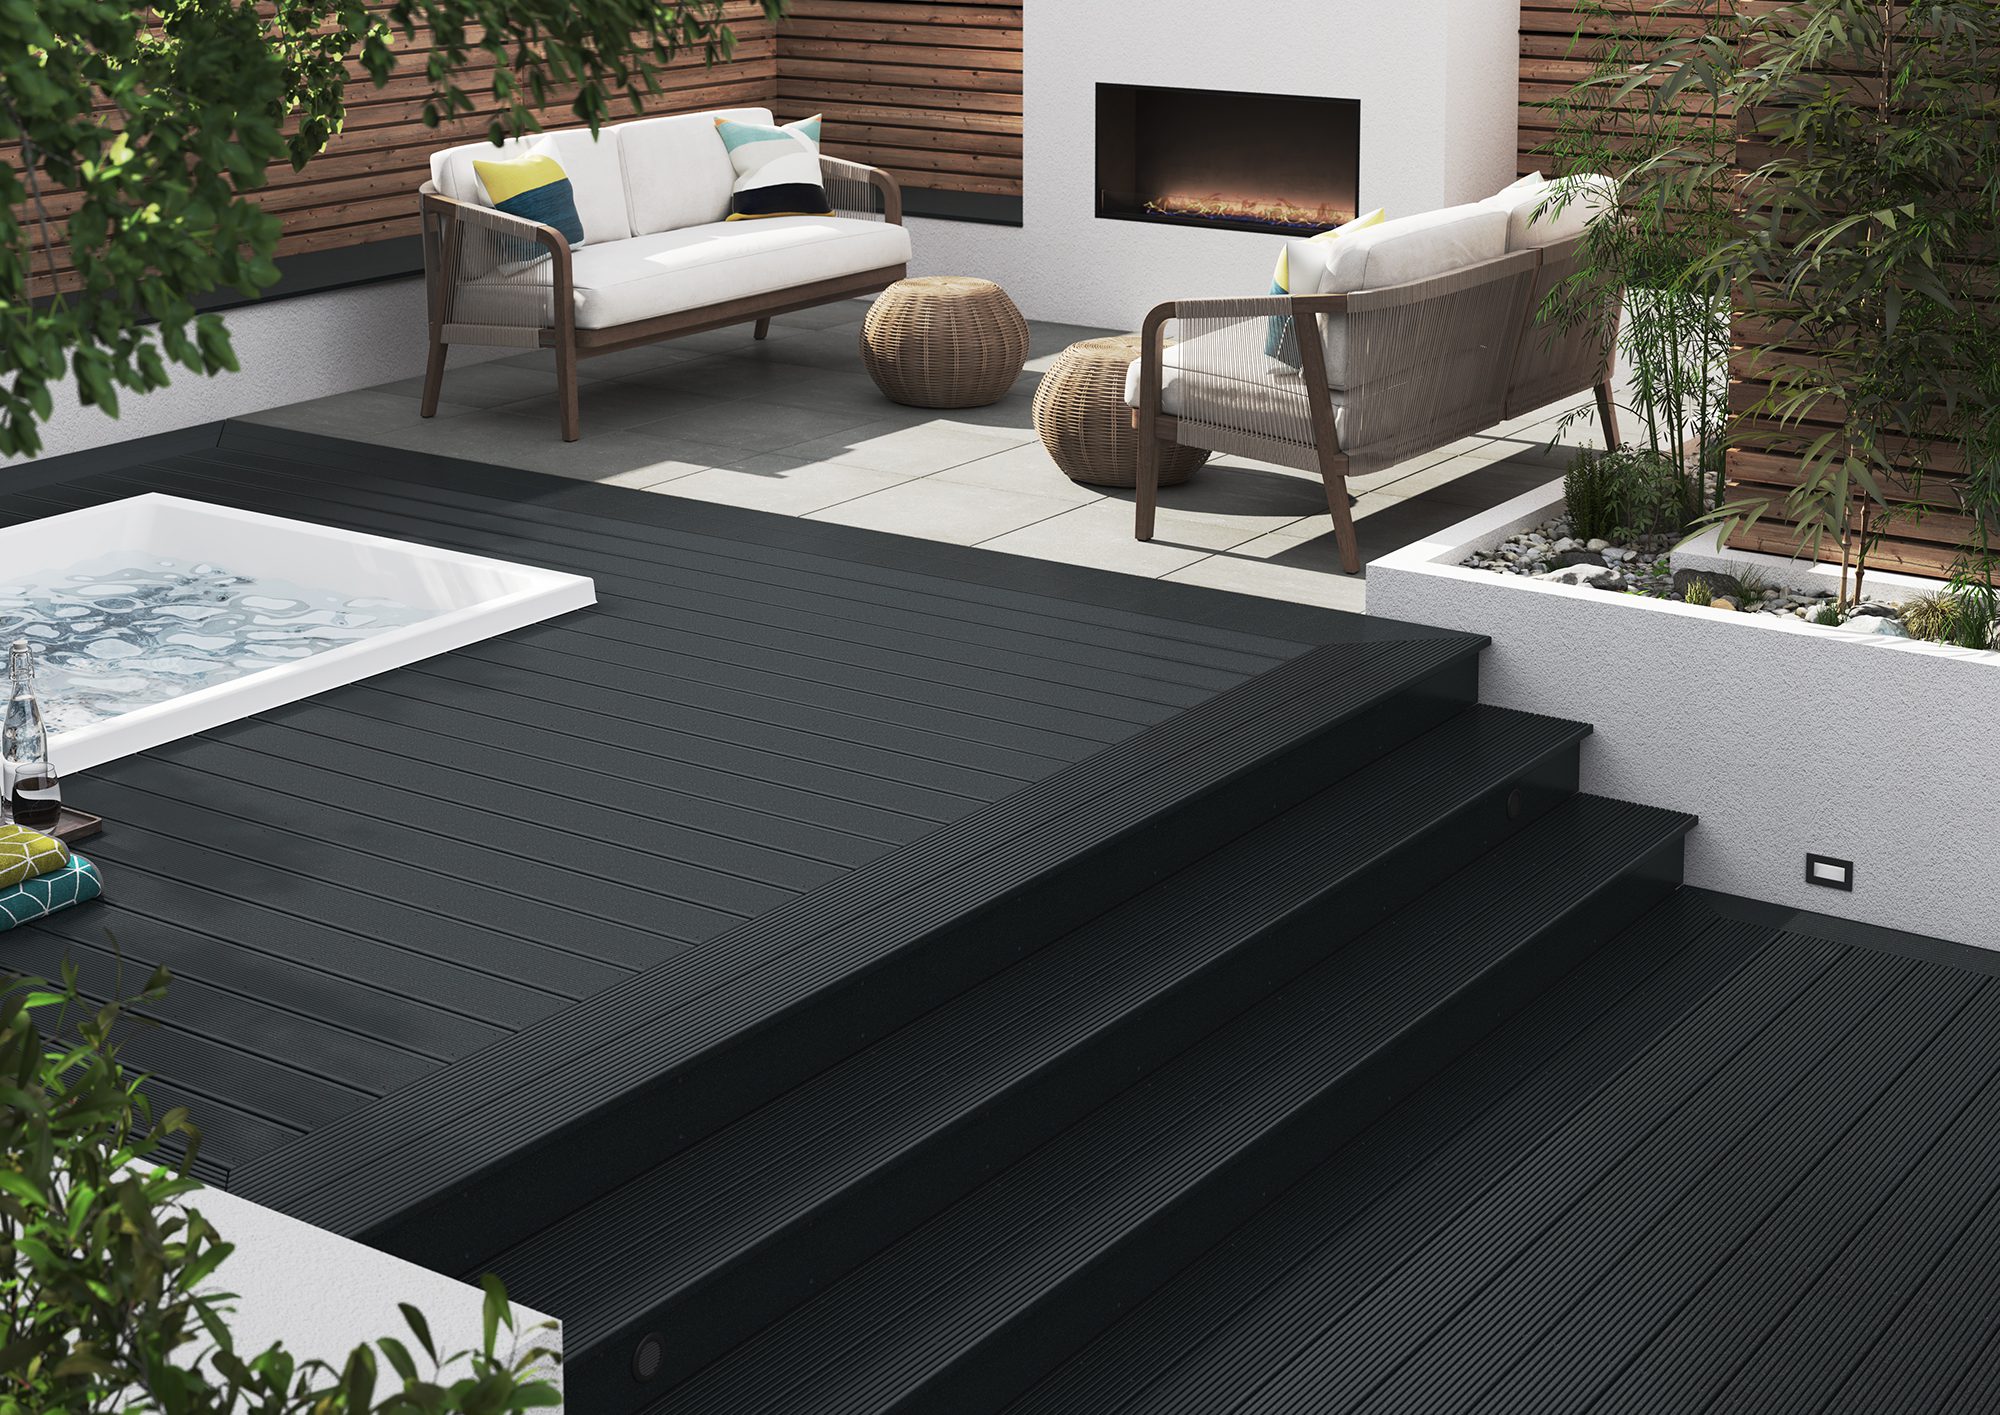 Black Composite Decking with hot tub